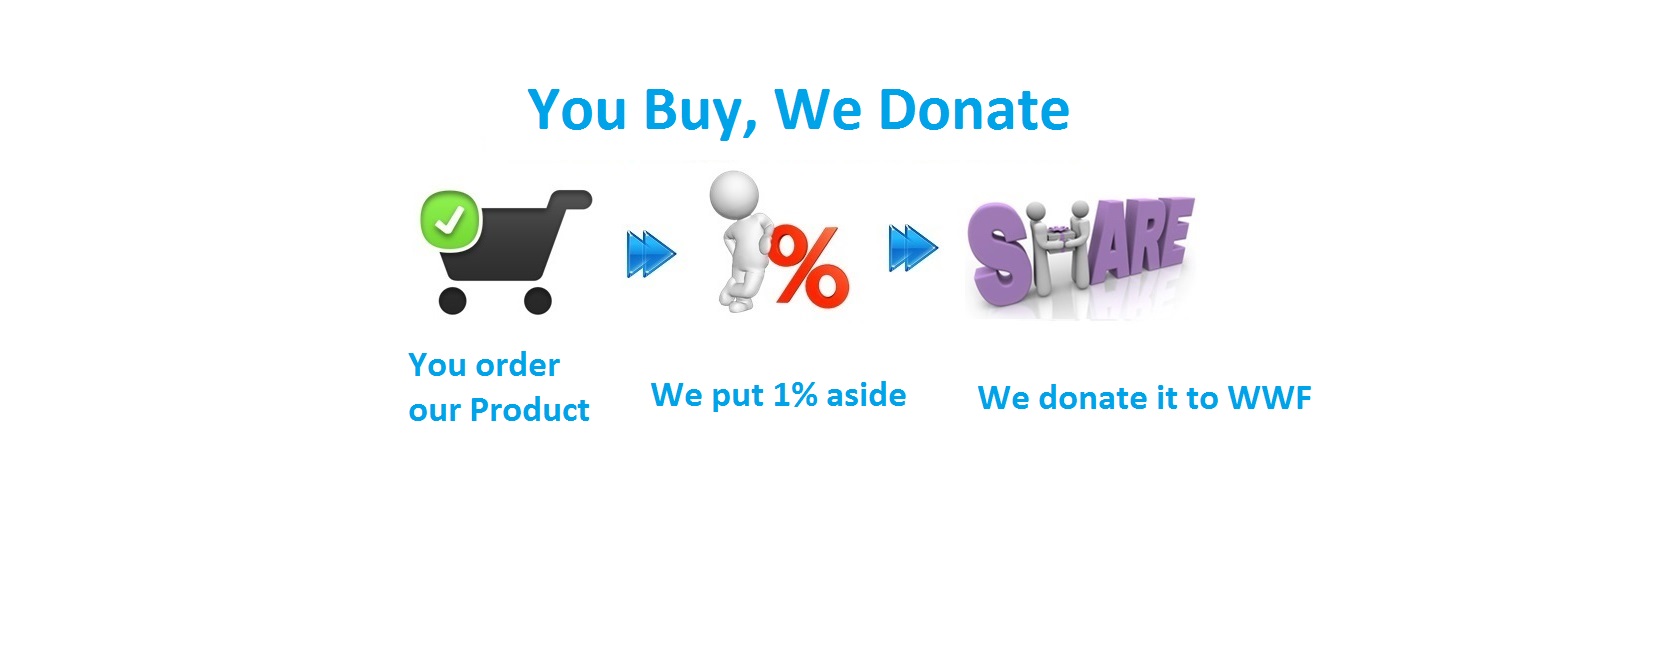 Charity or Donations to WWF